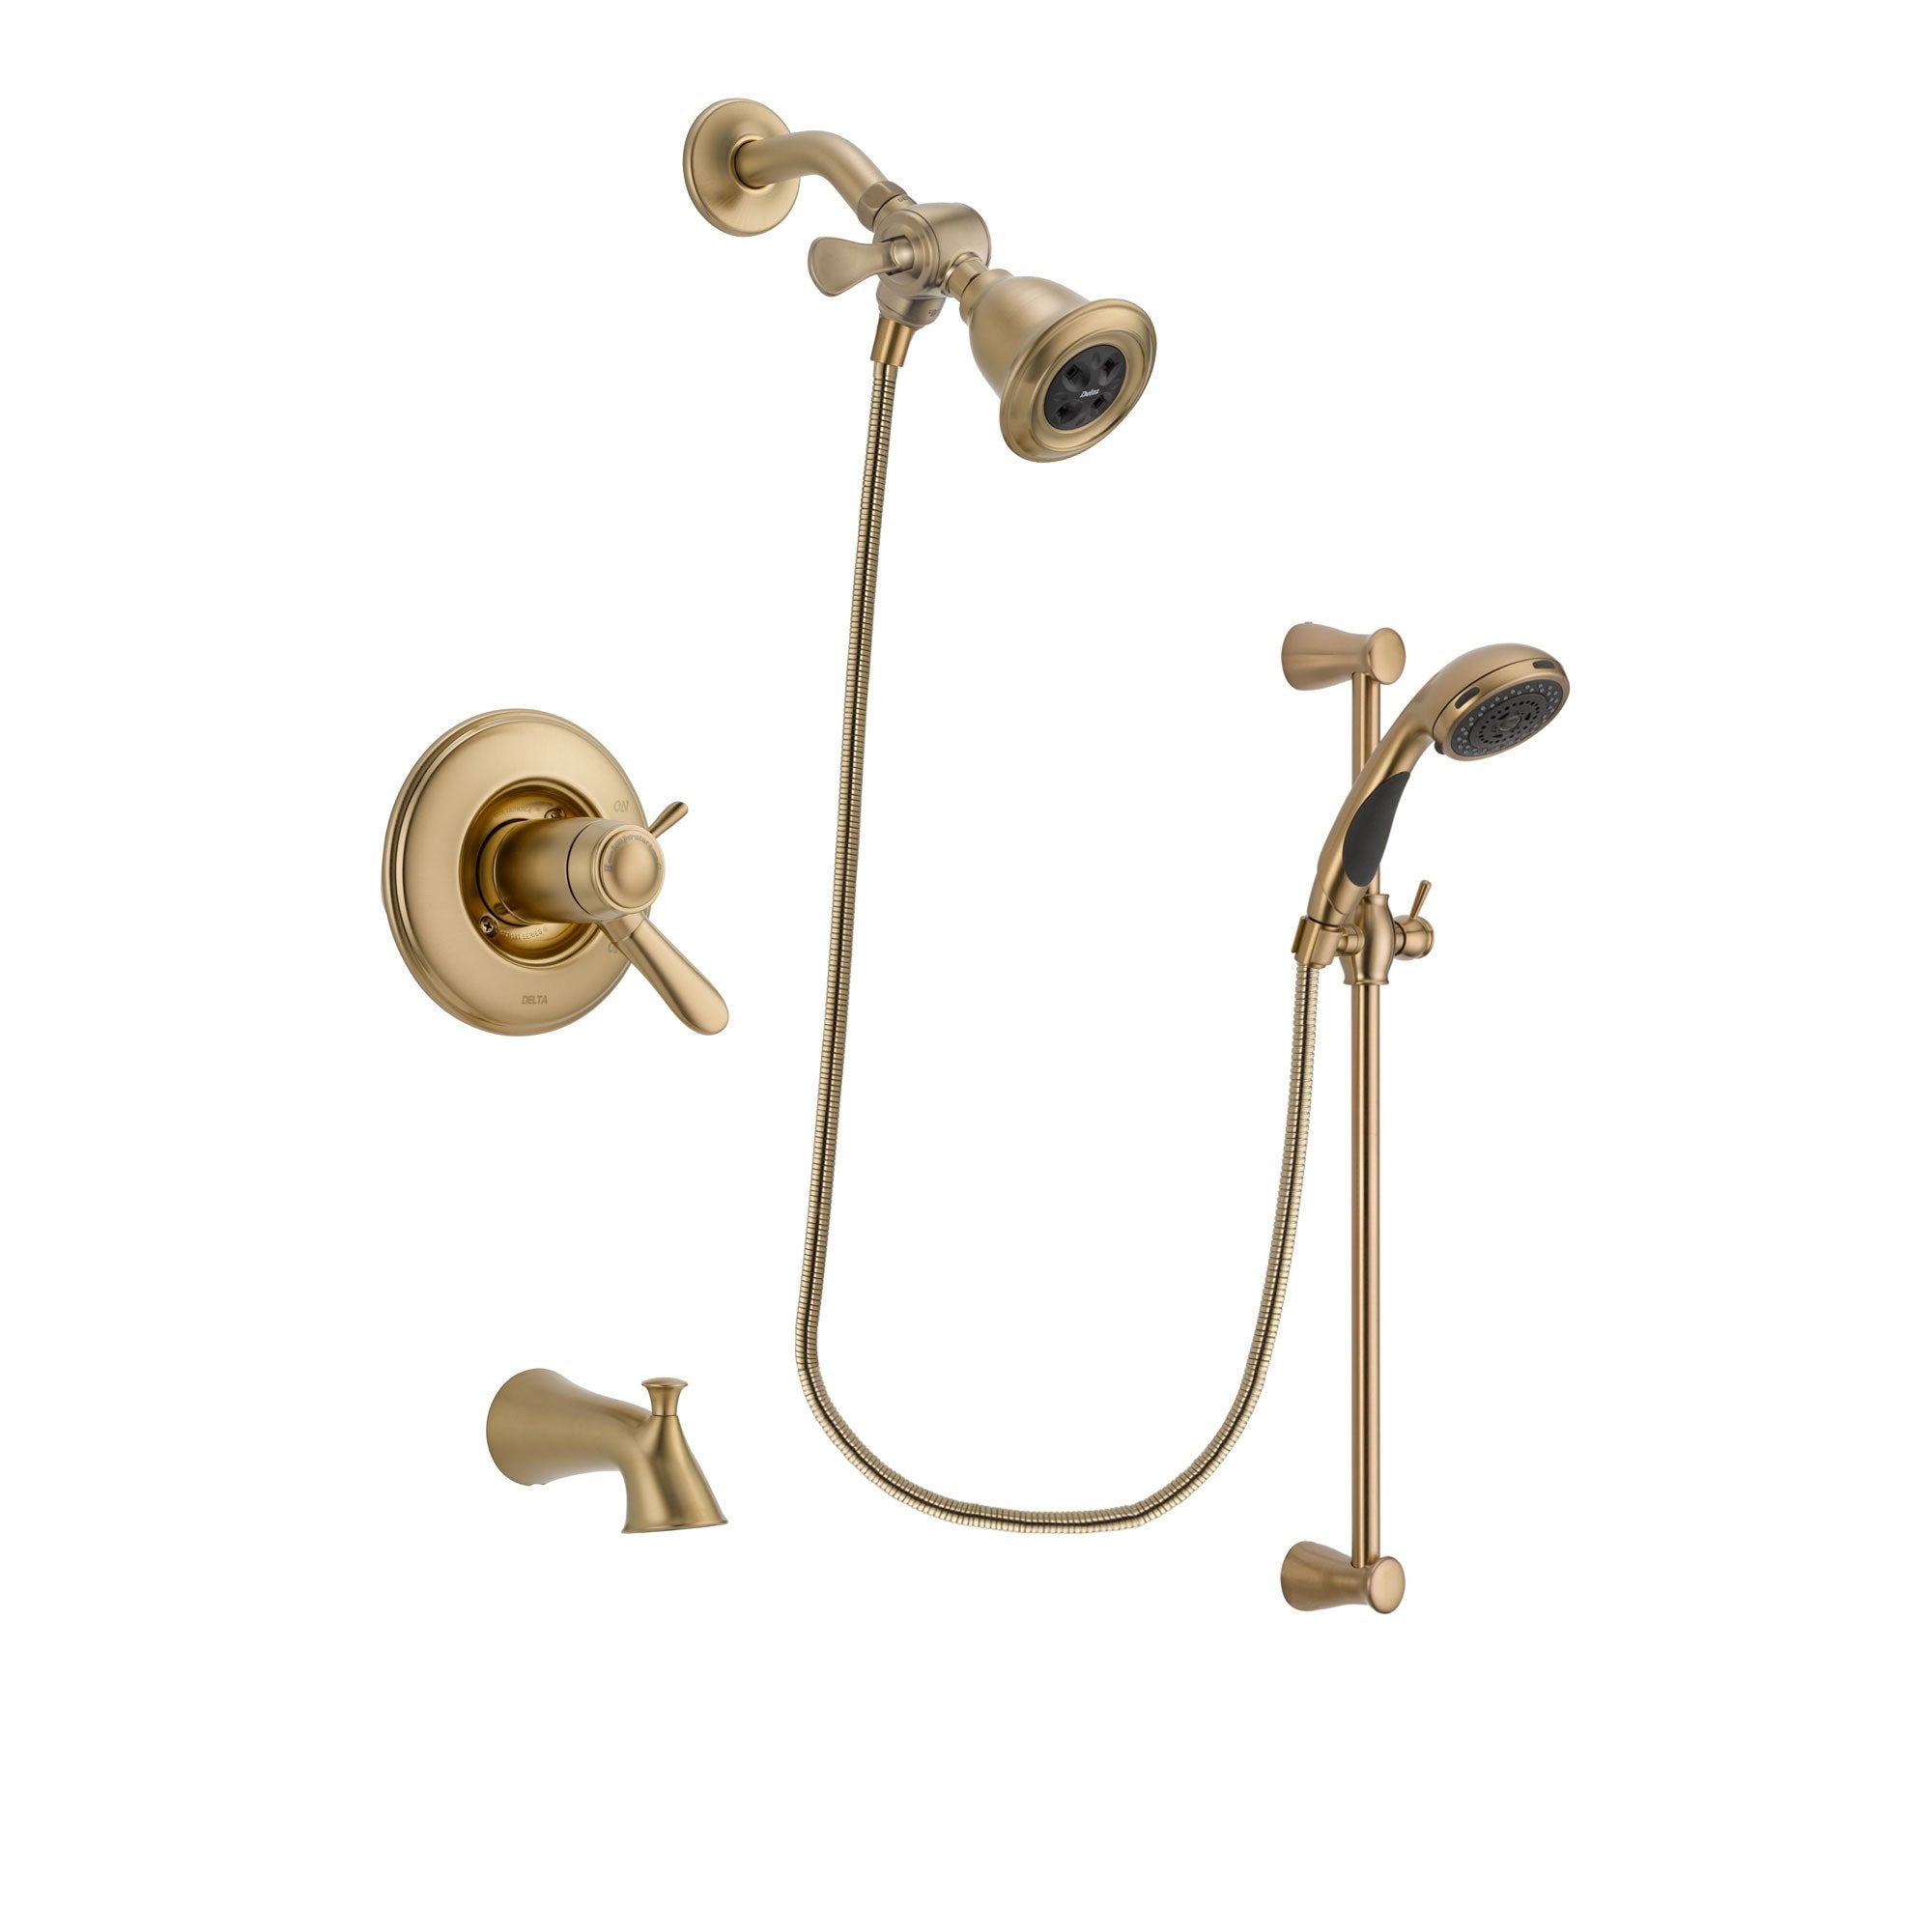 Delta Lahara Champagne Bronze Finish Thermostatic Tub and Shower Faucet System Package with Water Efficient Showerhead and Personal Handheld Shower Sprayer with Slide Bar Includes Rough-in Valve and Tub Spout DSP3447V